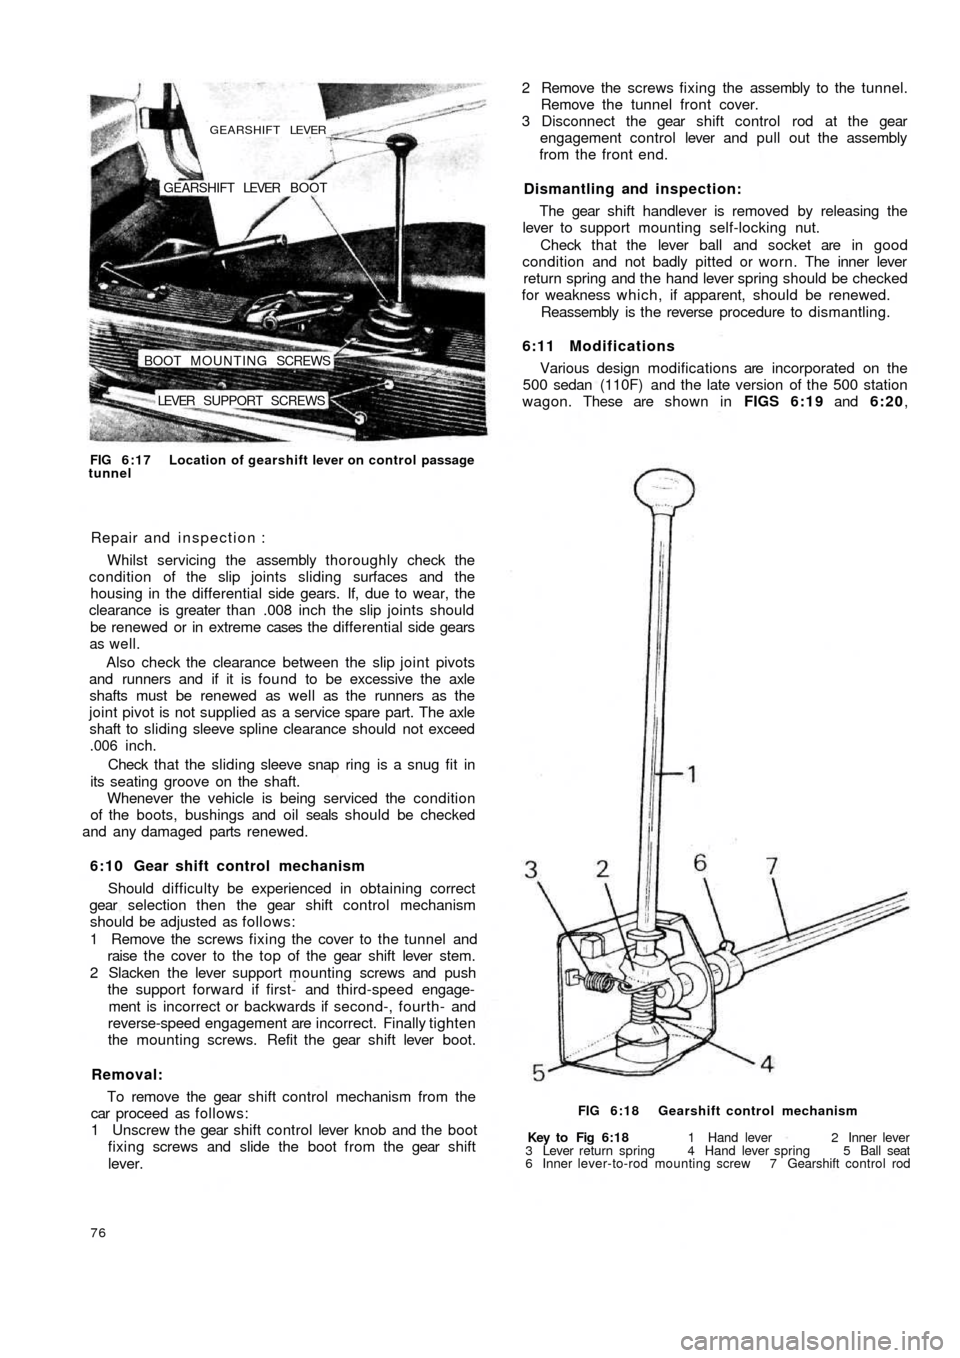 FIAT 500 1969 1.G Repair Manual LEVER  SUPPORT SCREWS BOOT MOUNTING SCREWSGEARSHIFT LEVER  BOOT
GEARSHIFT LEVER
FIG 6:17 Location of gearshift lever on control  passage
tunnel
Repair and inspection :
Whilst servicing the assembly th